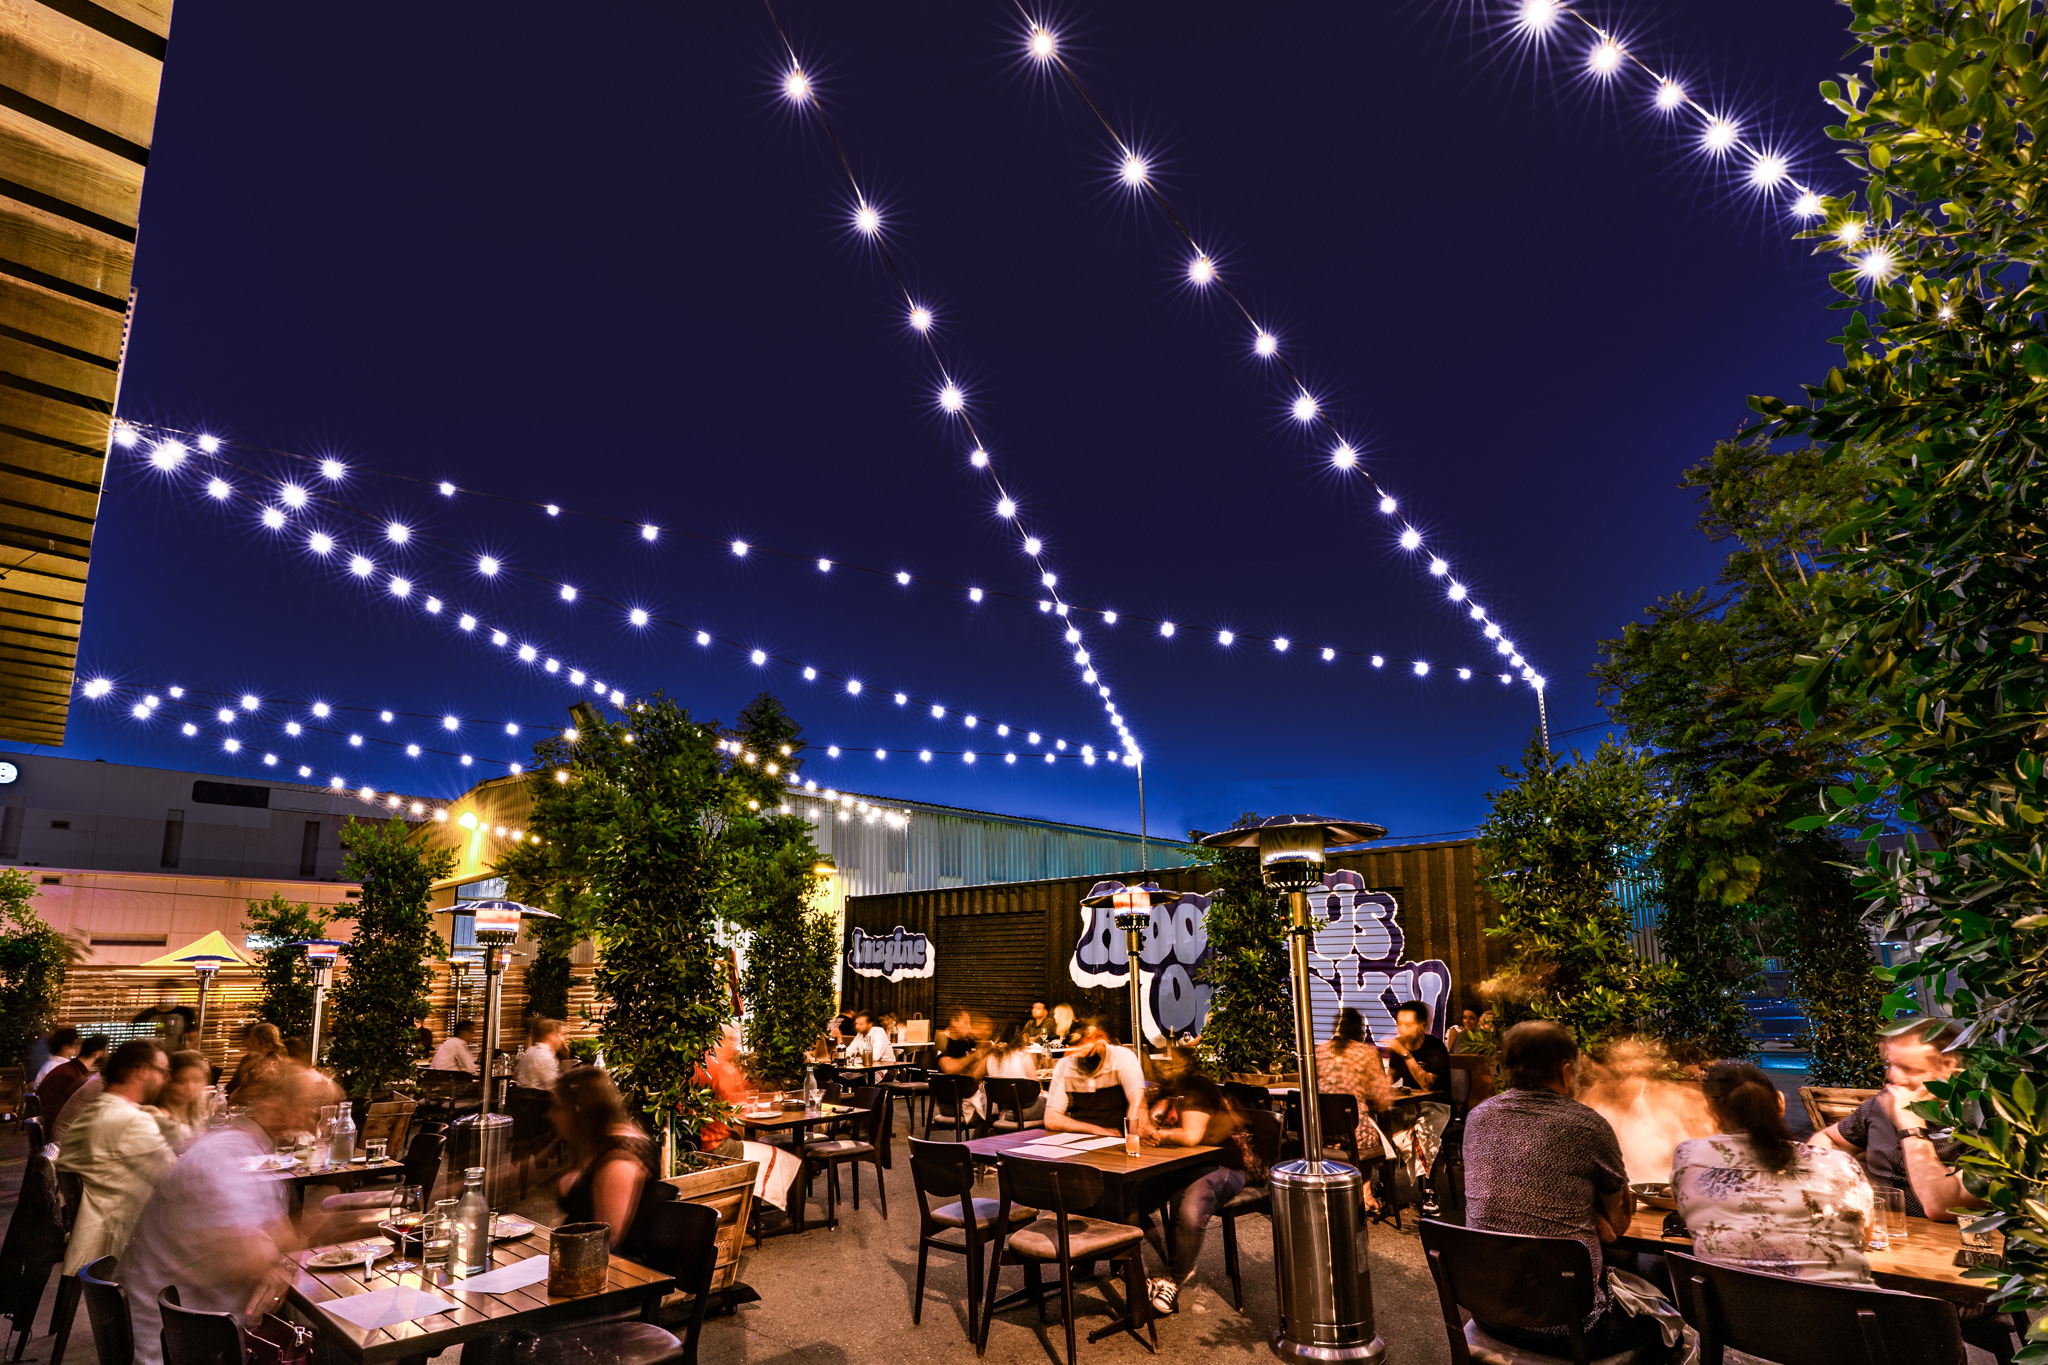 outdoor patio at juniper and ivy with happy diners under the stars and patio lights